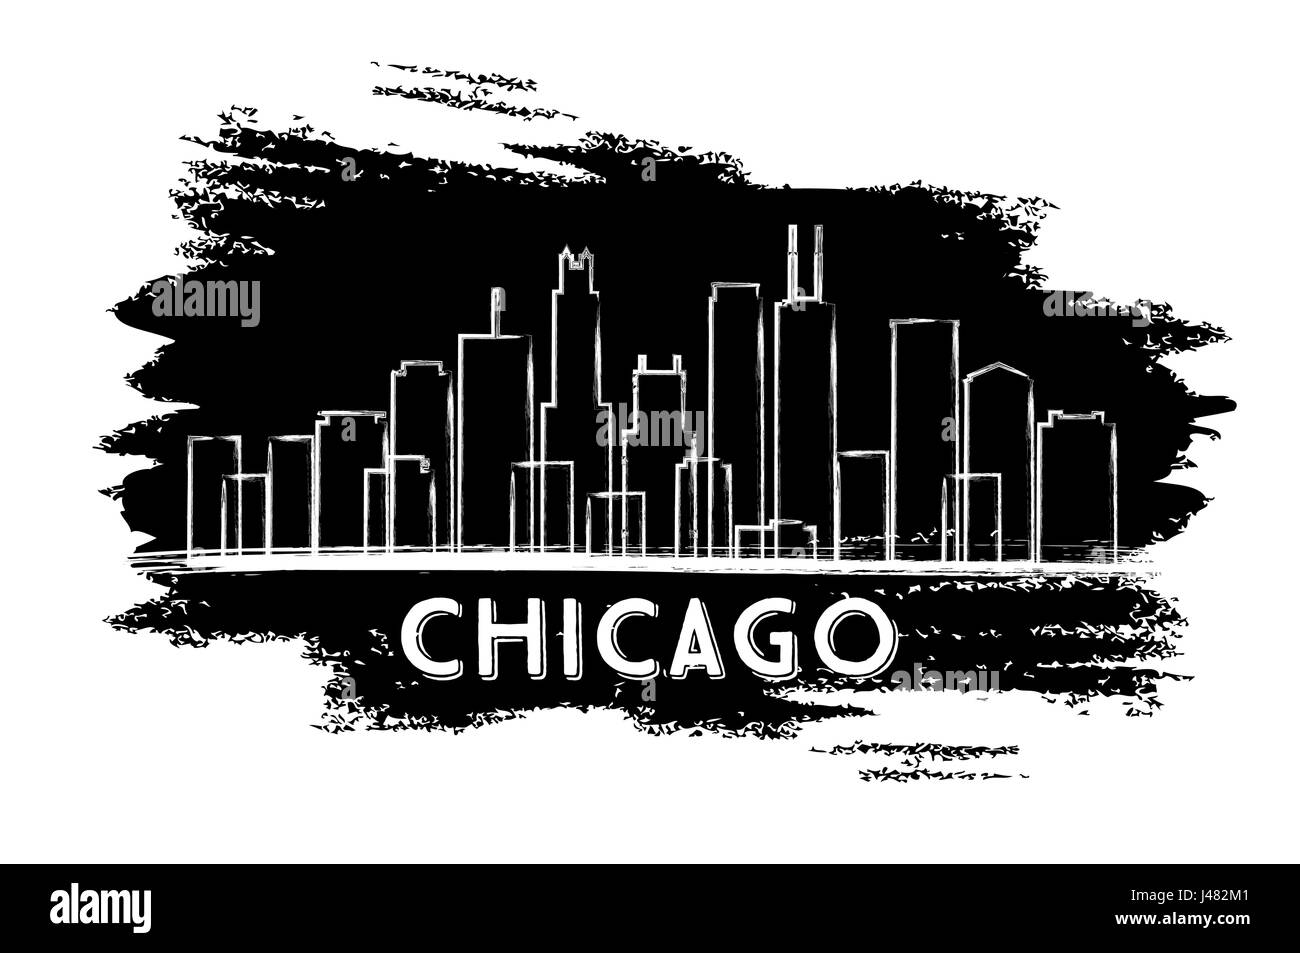 Chicago Skyline Silhouette. Hand Drawn Sketch. Business Travel and Tourism Concept with Historic Architecture. Image for Presentation Banner Placard Stock Vector